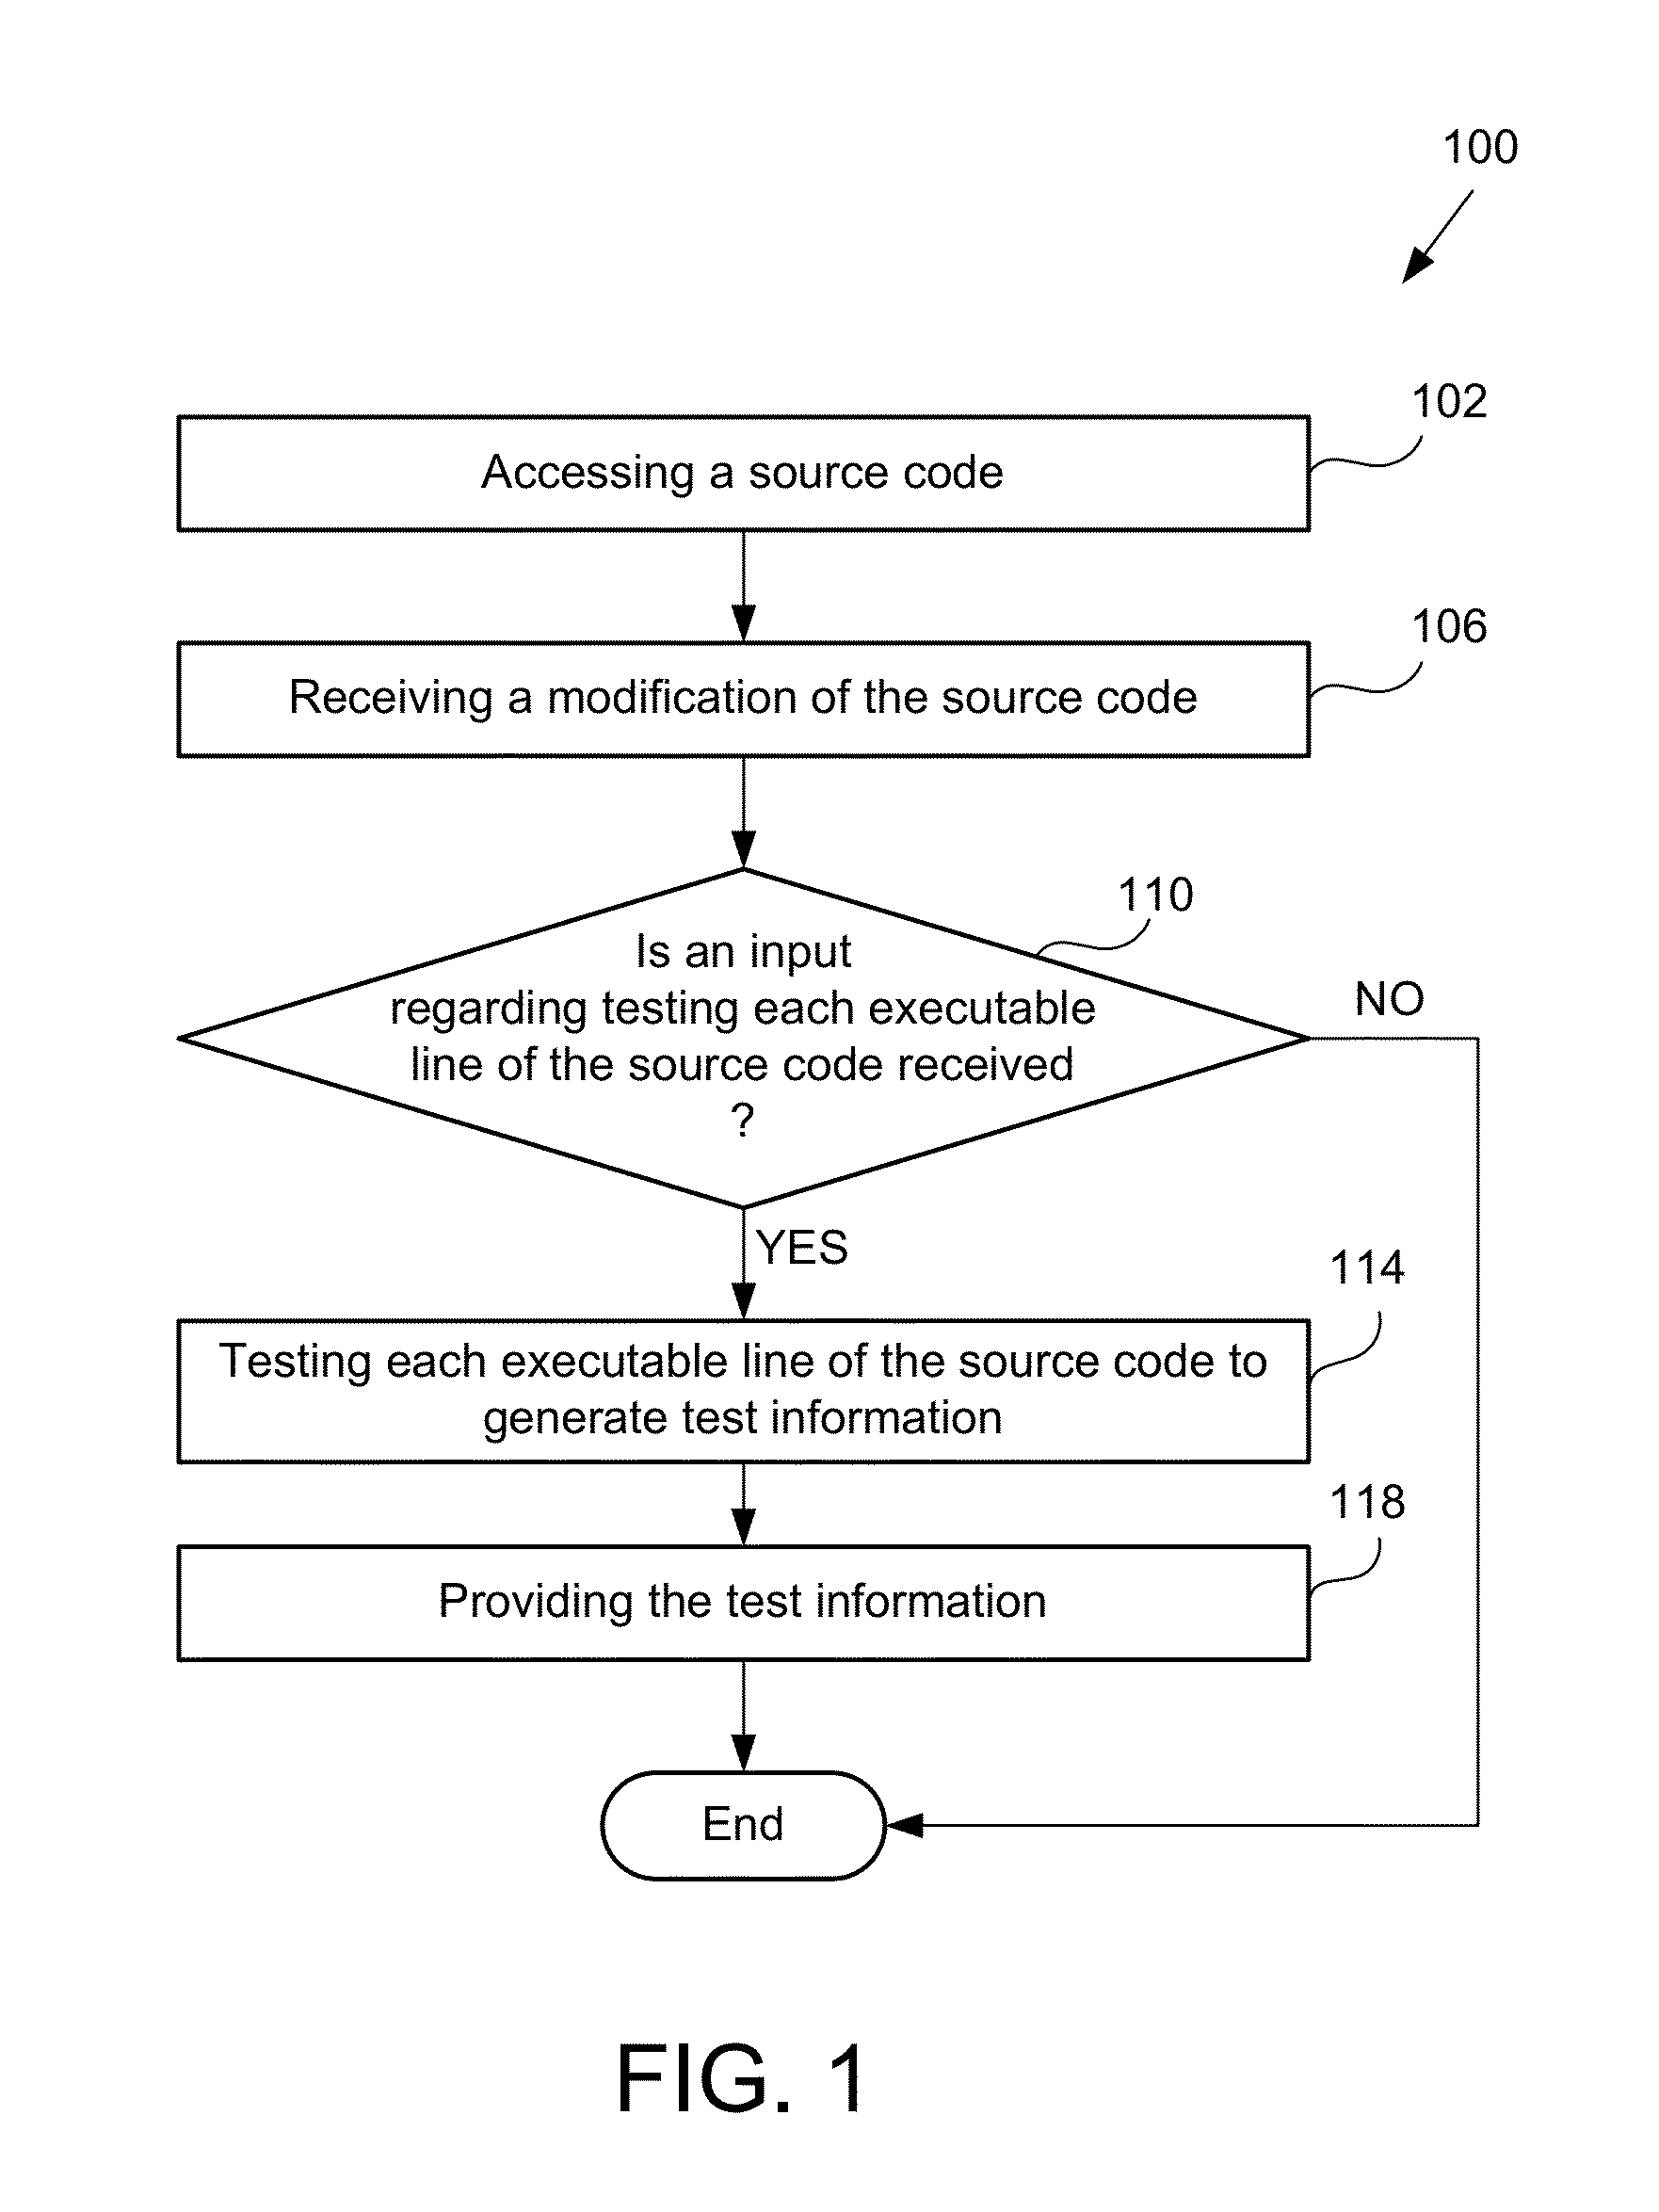 Methods and systems for generating test information from a source code